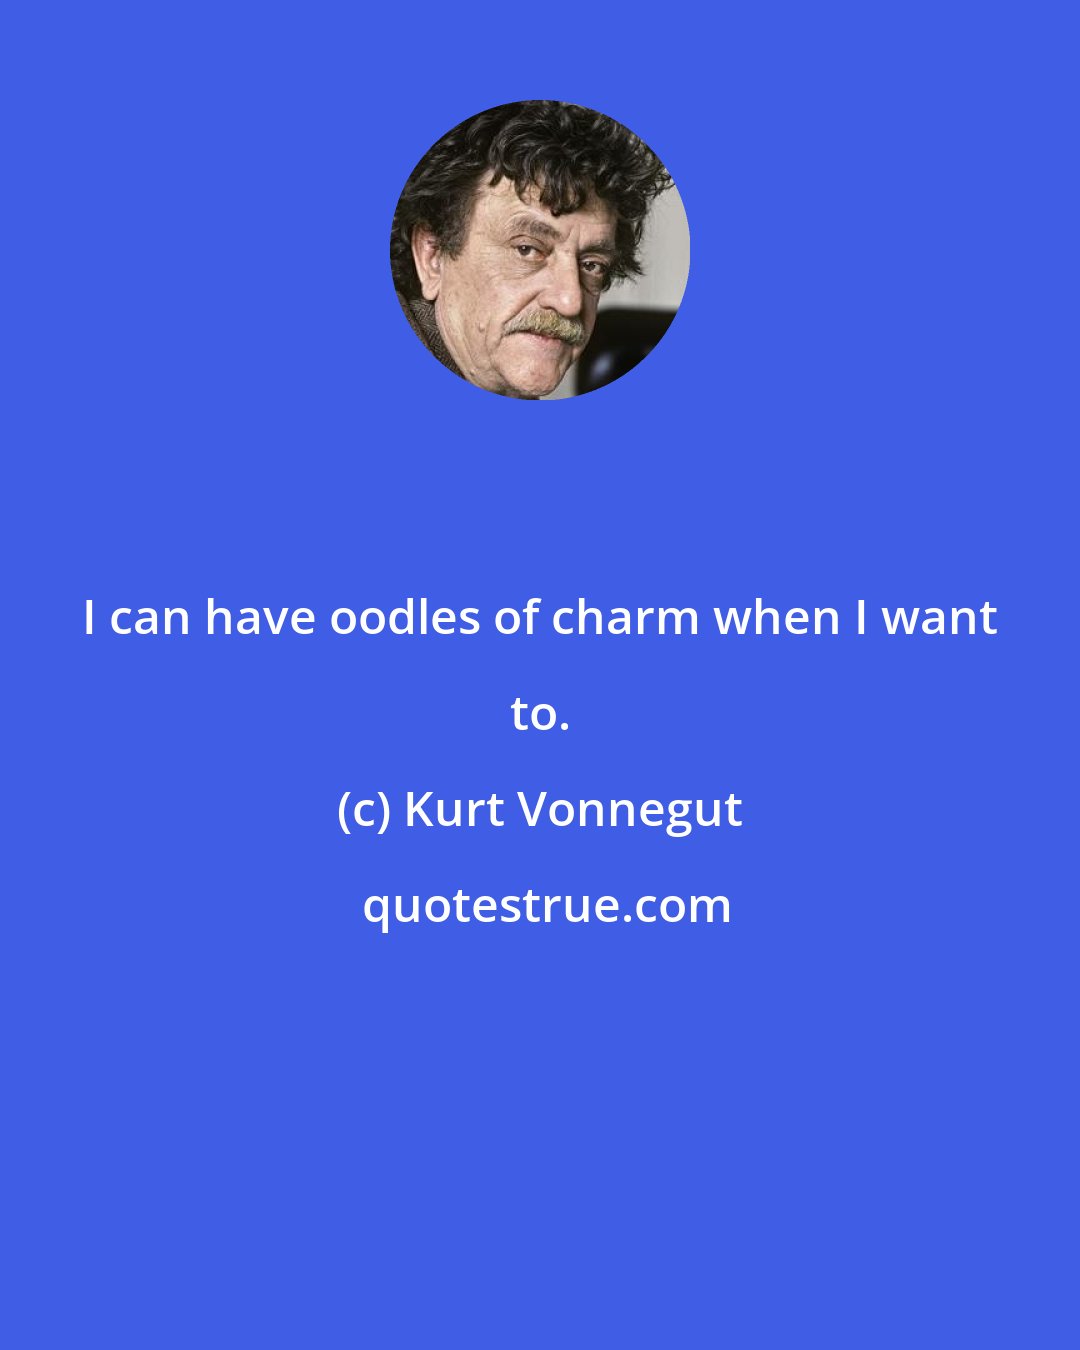 Kurt Vonnegut: I can have oodles of charm when I want to.